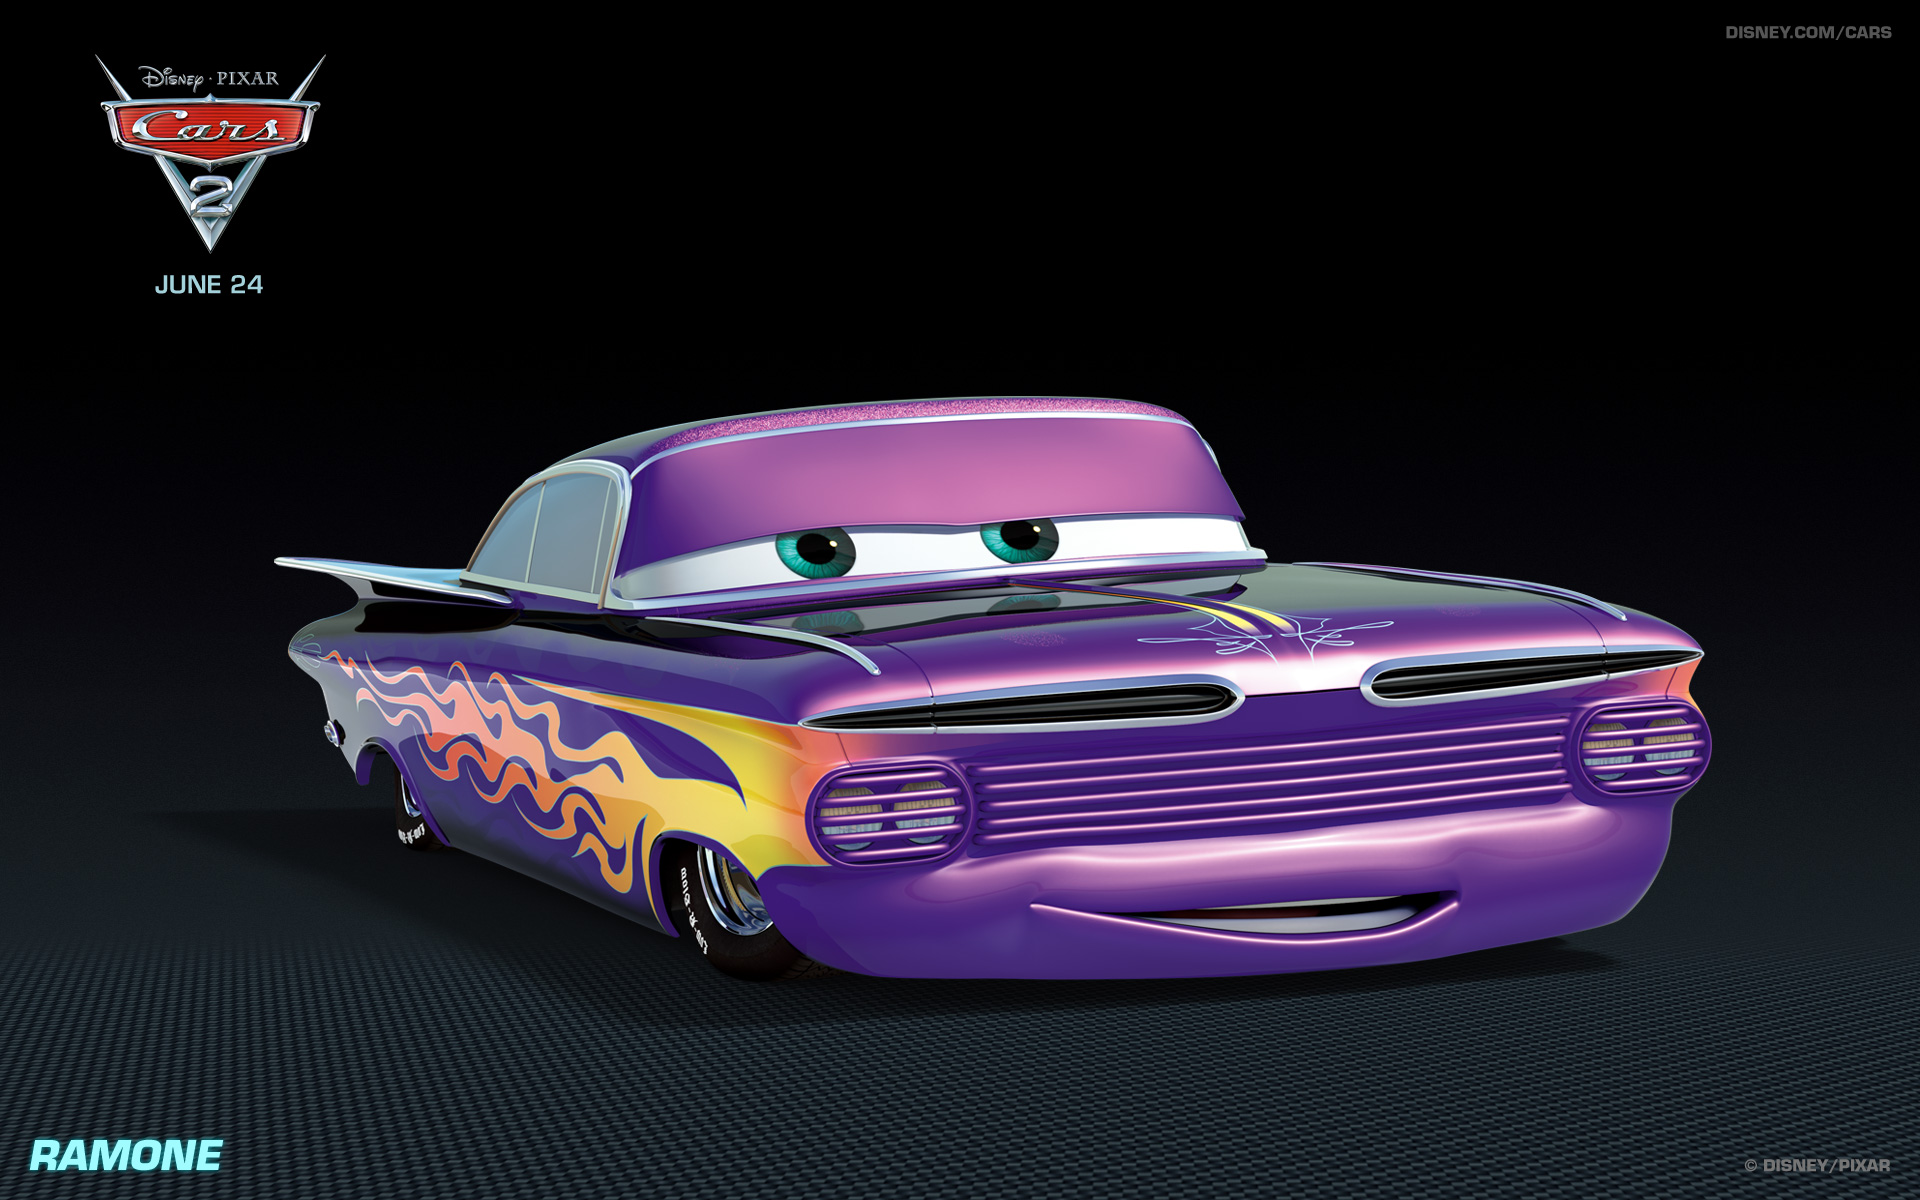 Ramone the Custom Car from Disneys Cars wallpaper   Click picture